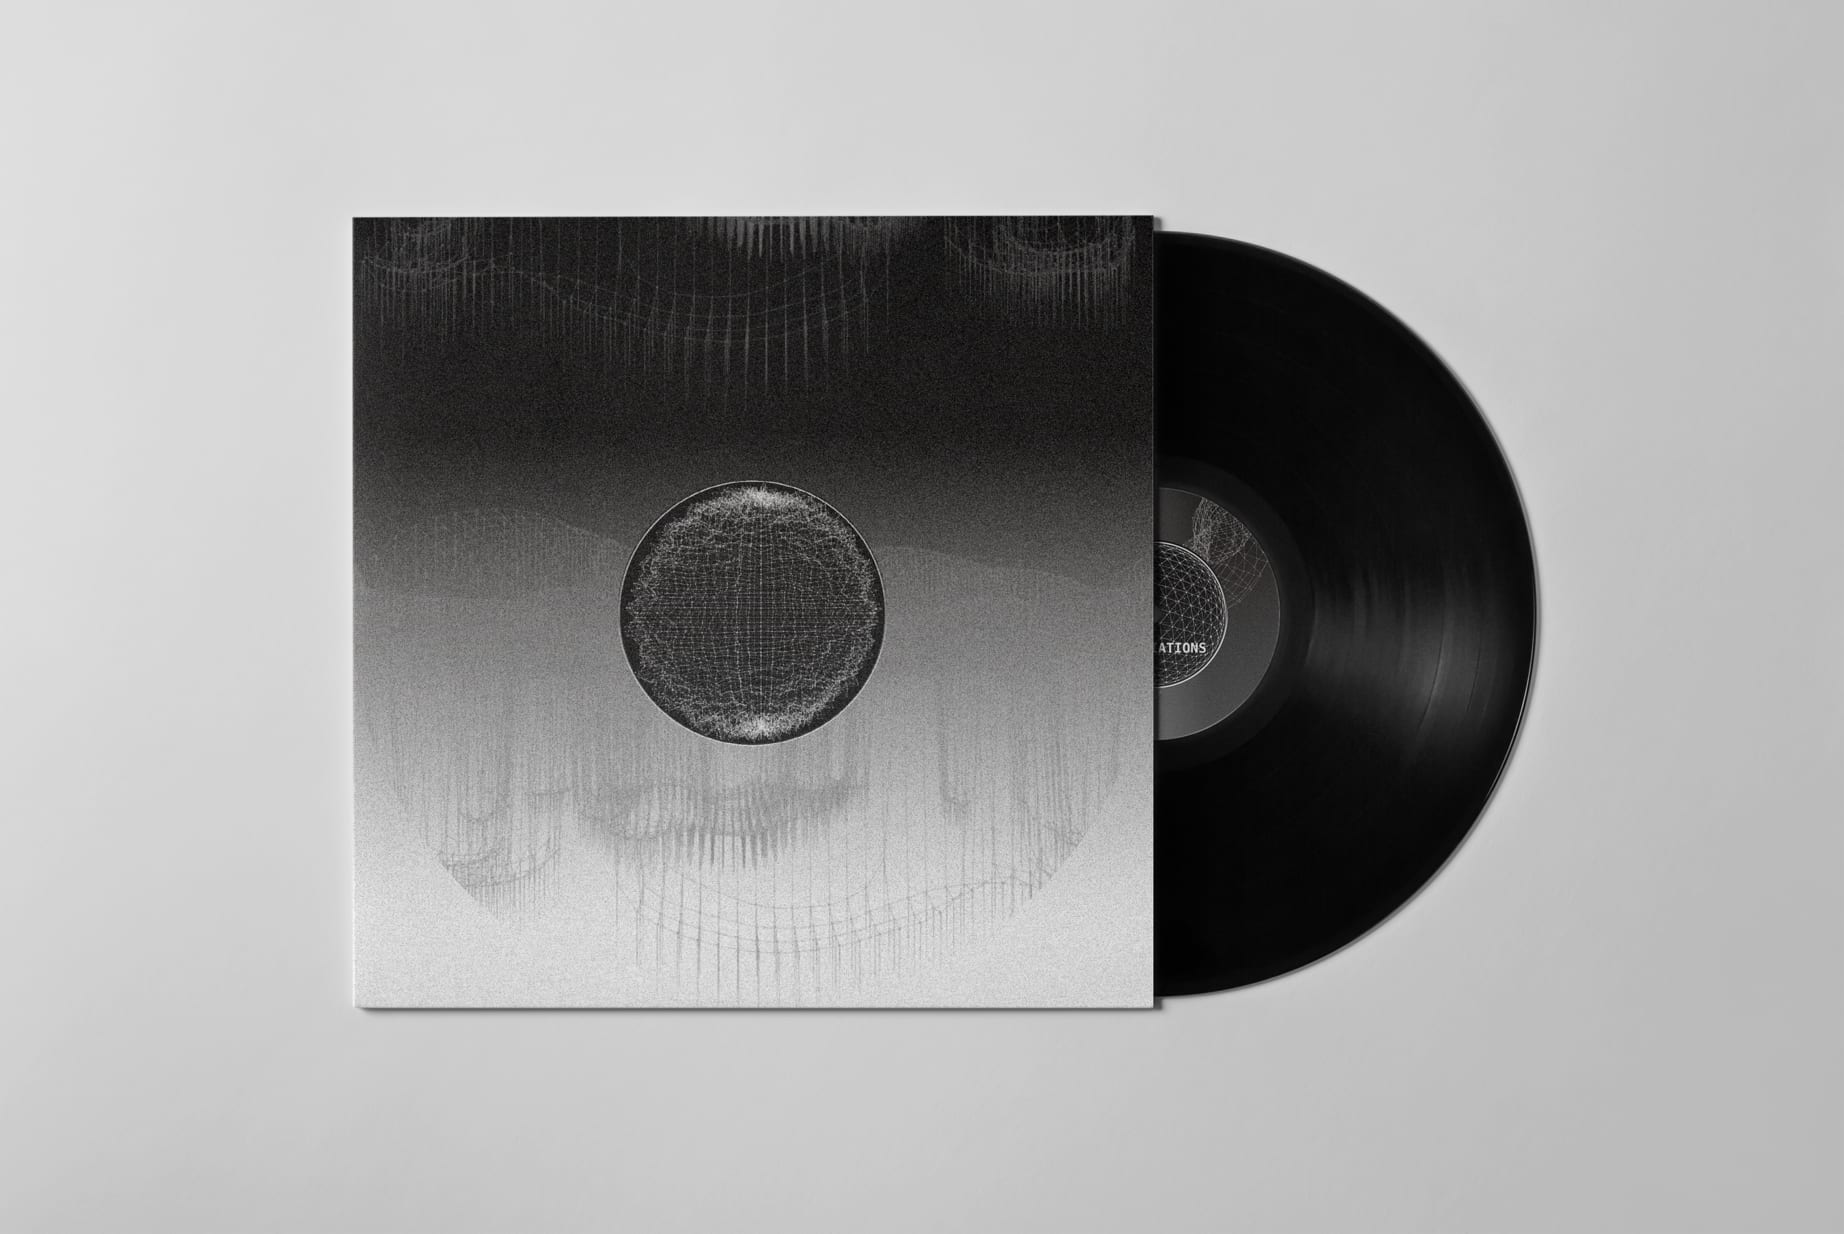 A vinyl record in gray packaging with an intricate pattern.